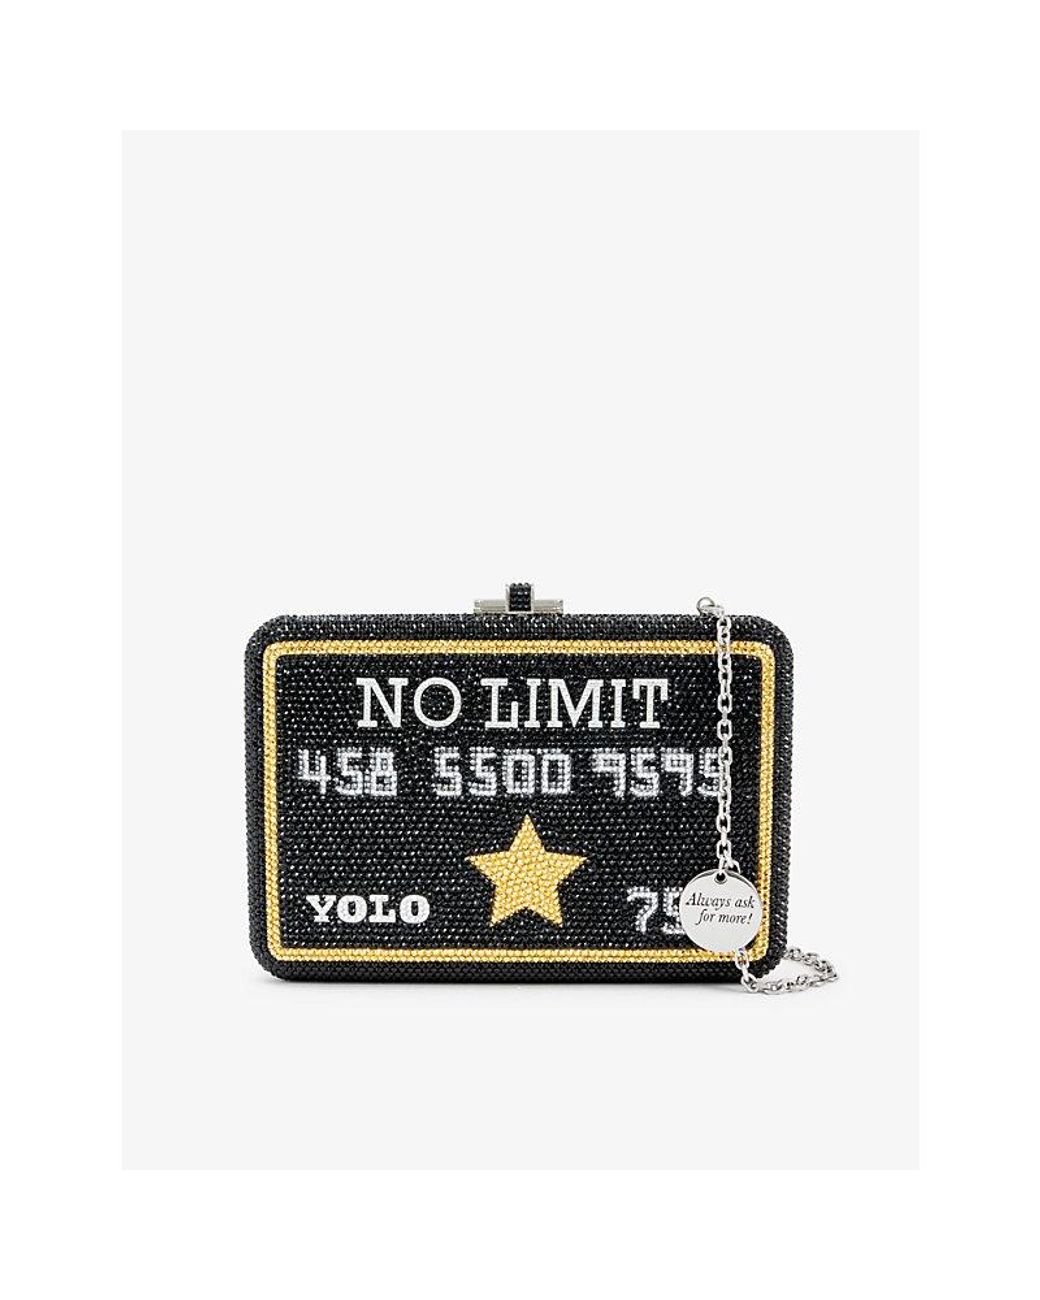 Judith Leiber Judith Lieber Couture X Ashley Longshore Credit Card  Crystal-embellished Metal Clutch Bag in Black | Lyst